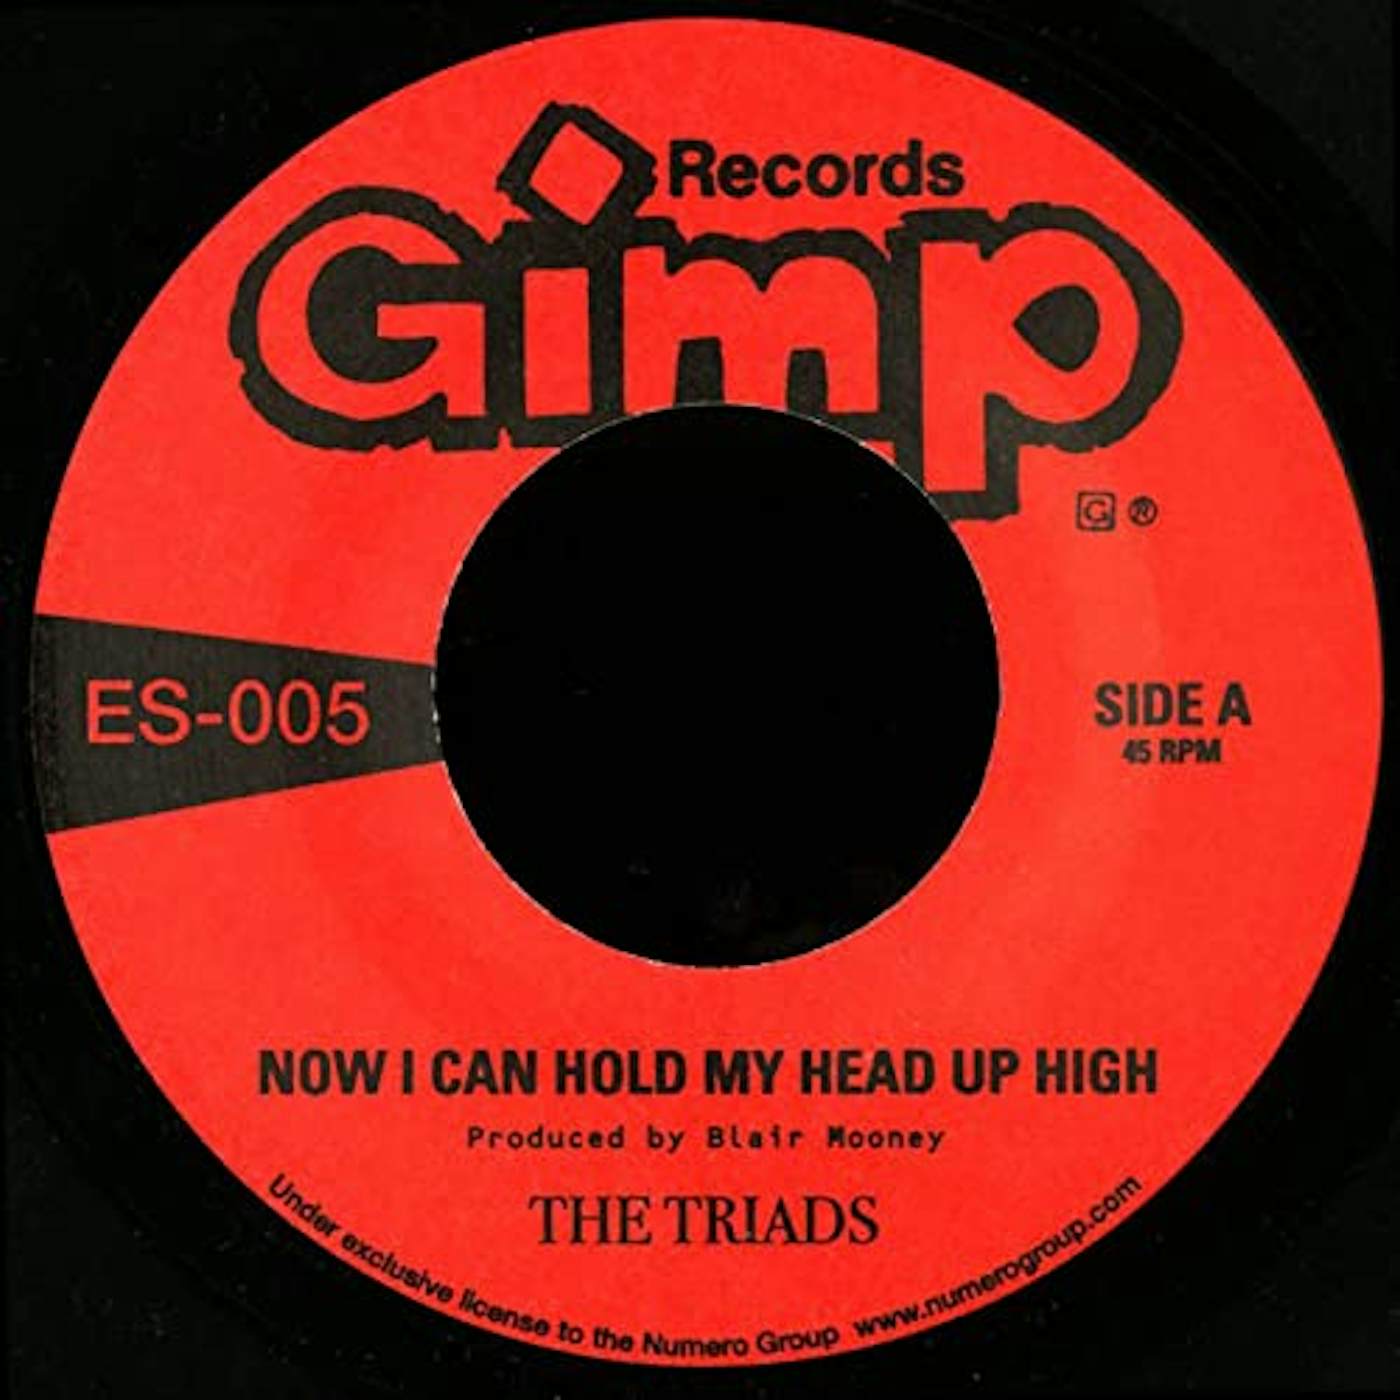 Triads IF YOU'RE LOOKING FOR LOVE / NOW I CAN HOLD MY Vinyl Record